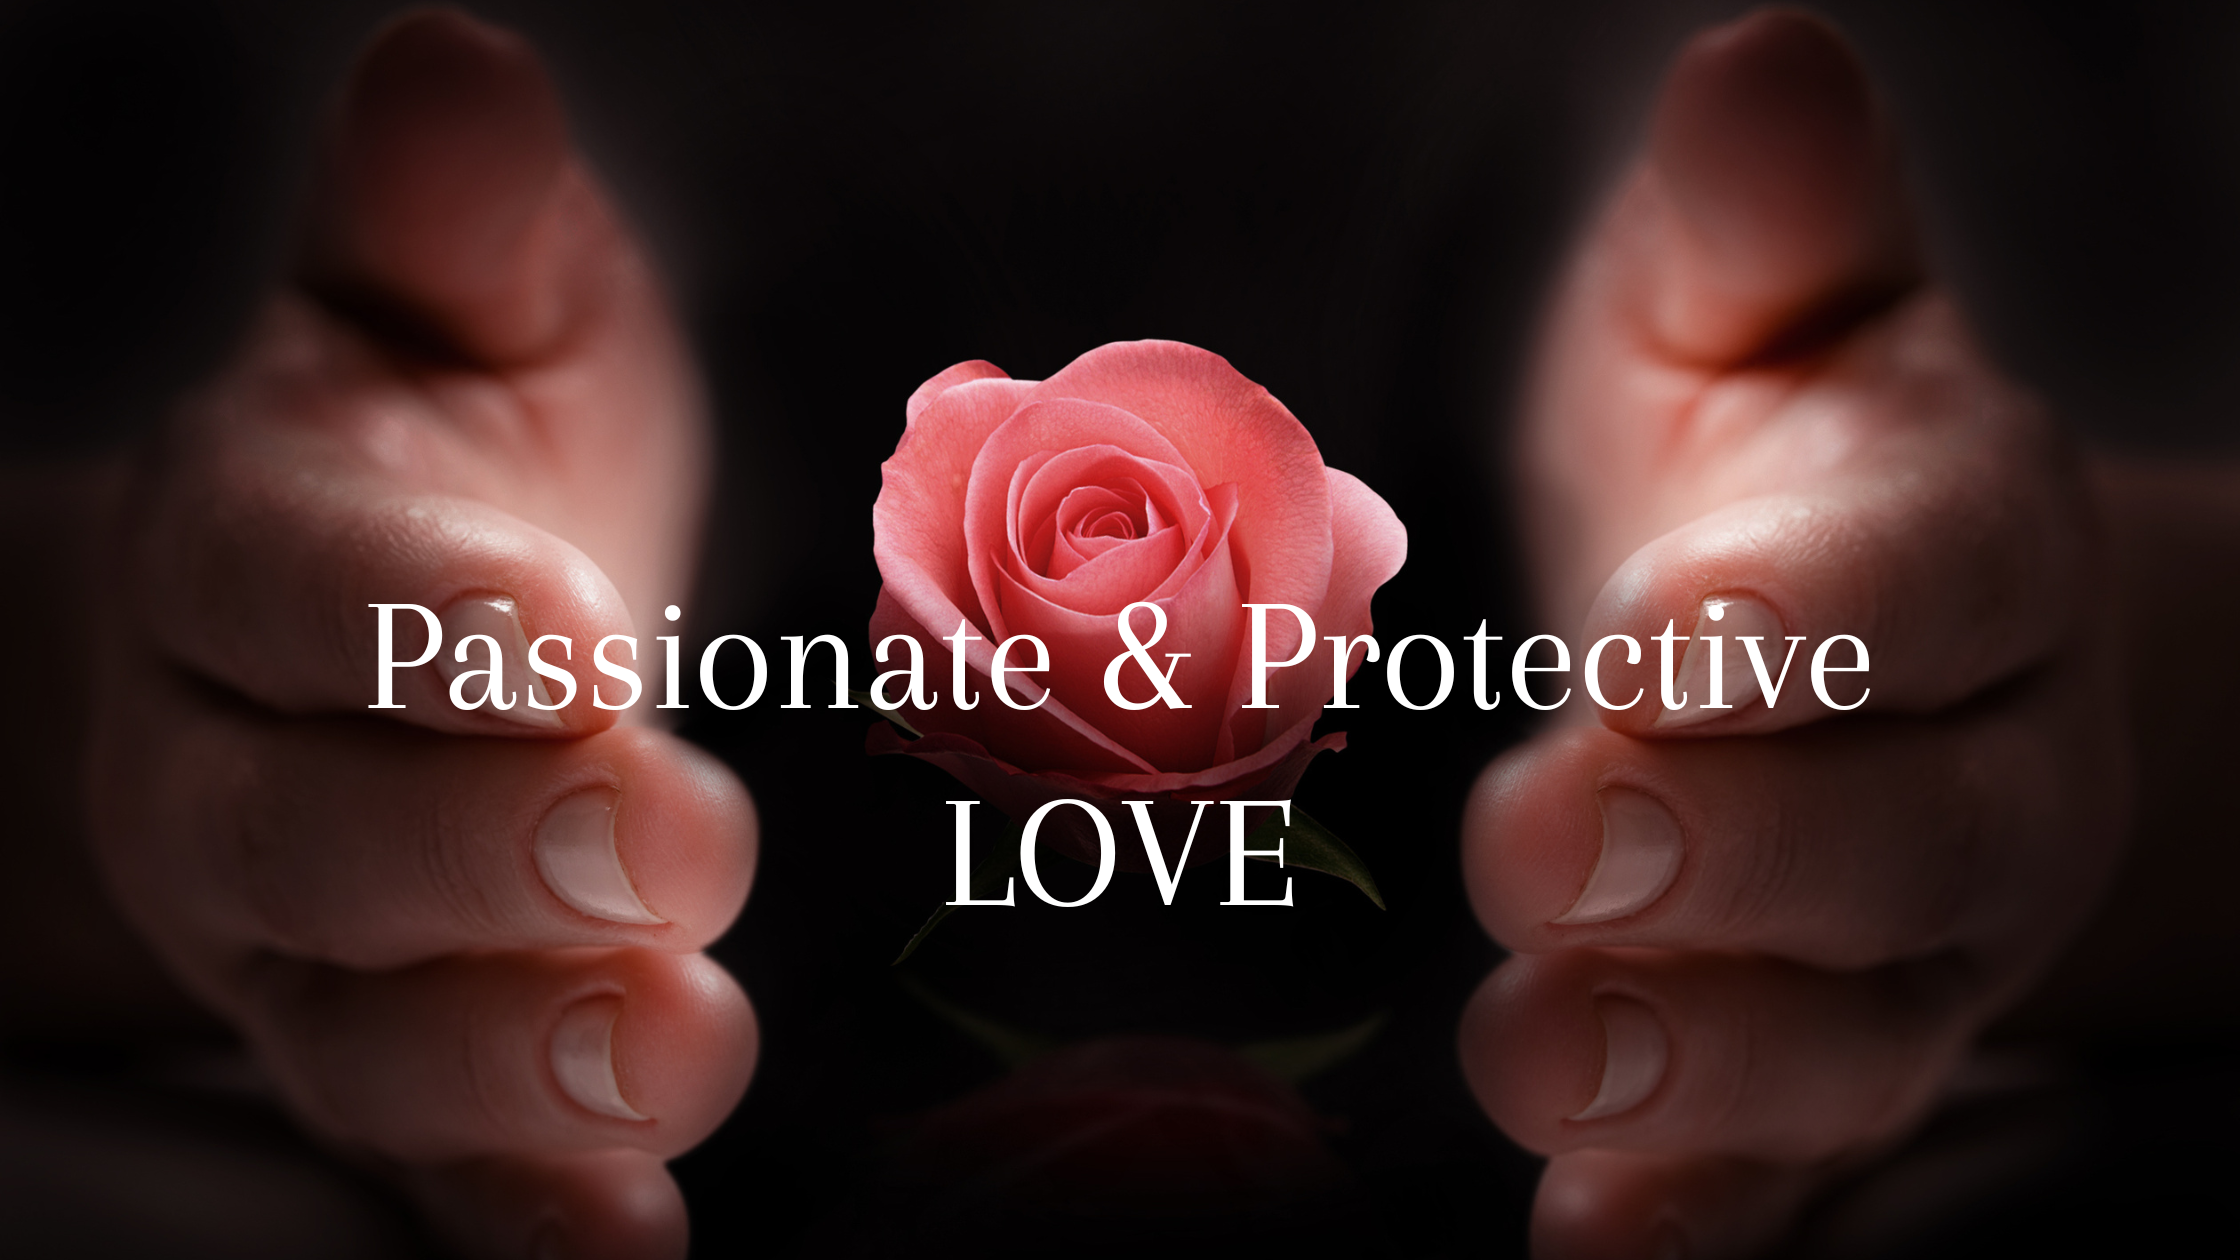 God's Passionate and Protective Love